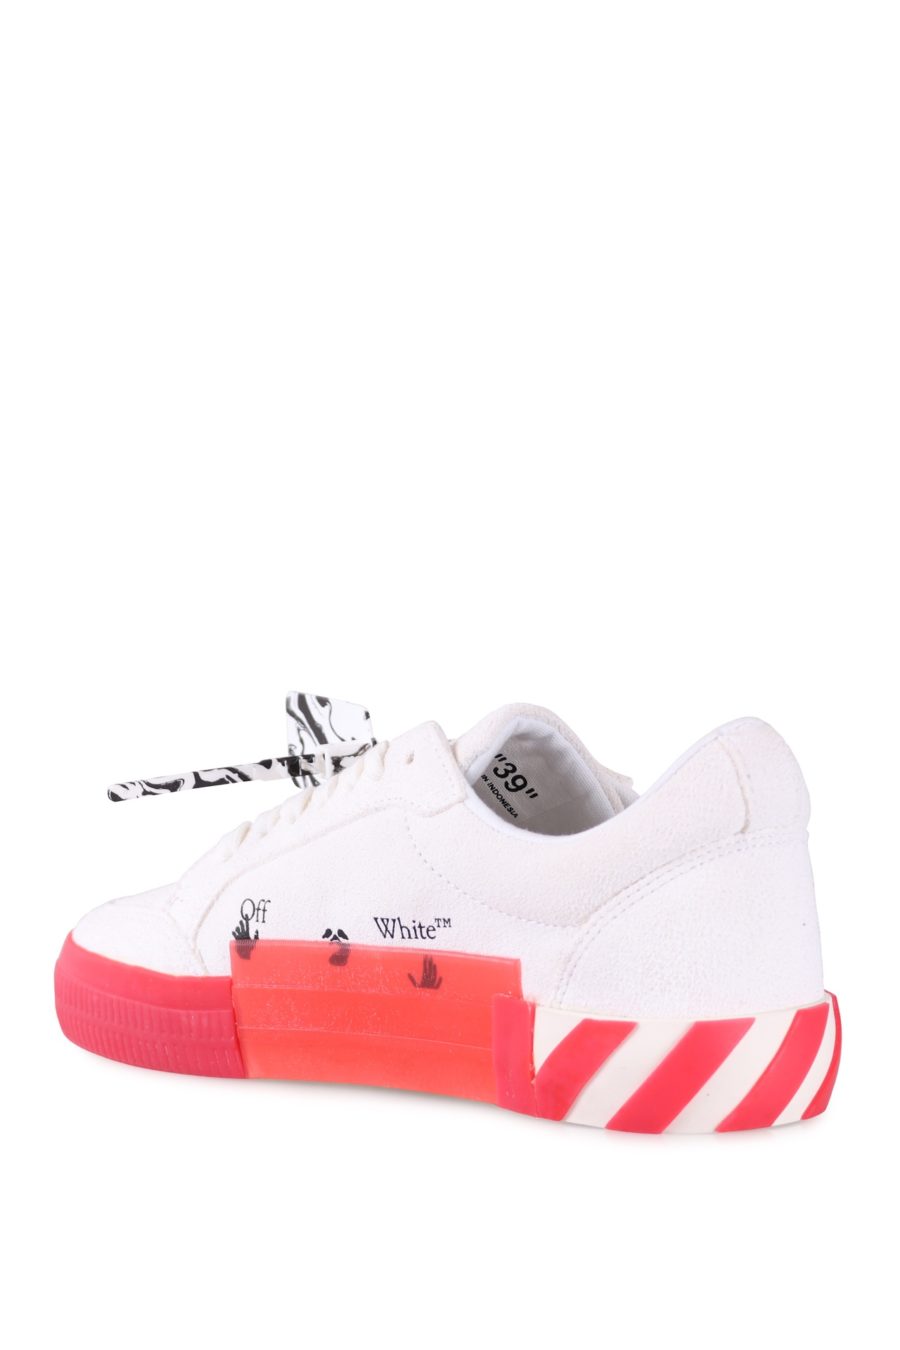 Trainers Off-White white with red - a69066ccb98bdd90129bf936675407a7d122025d